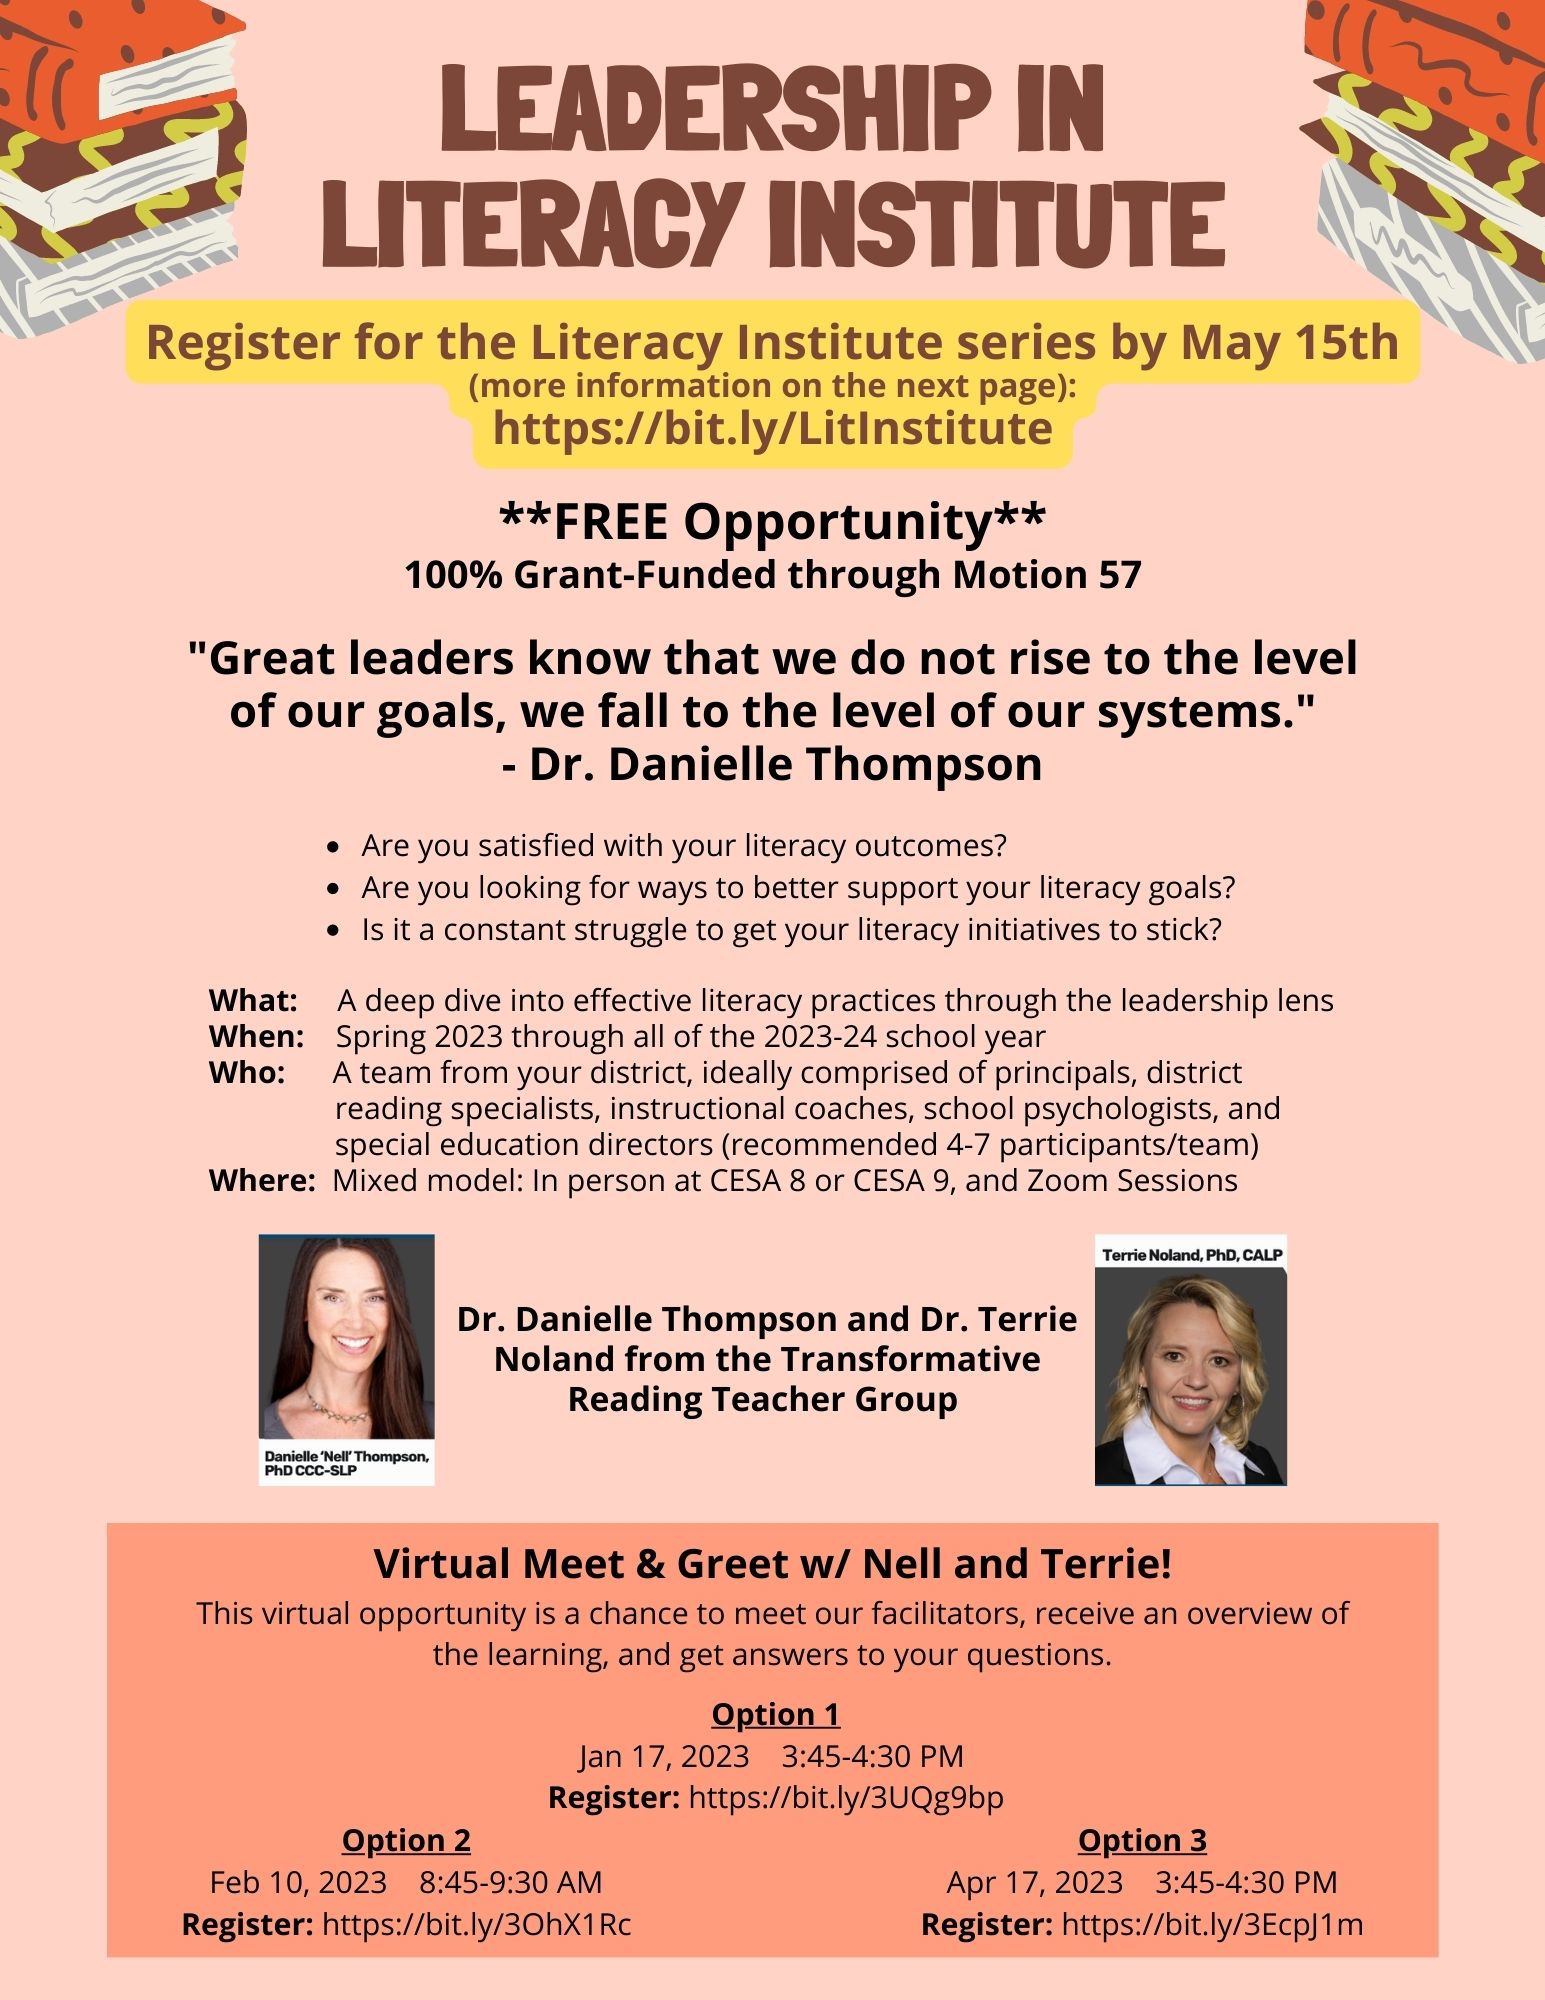 Leadership in Literacy Institute flyer page 1 image